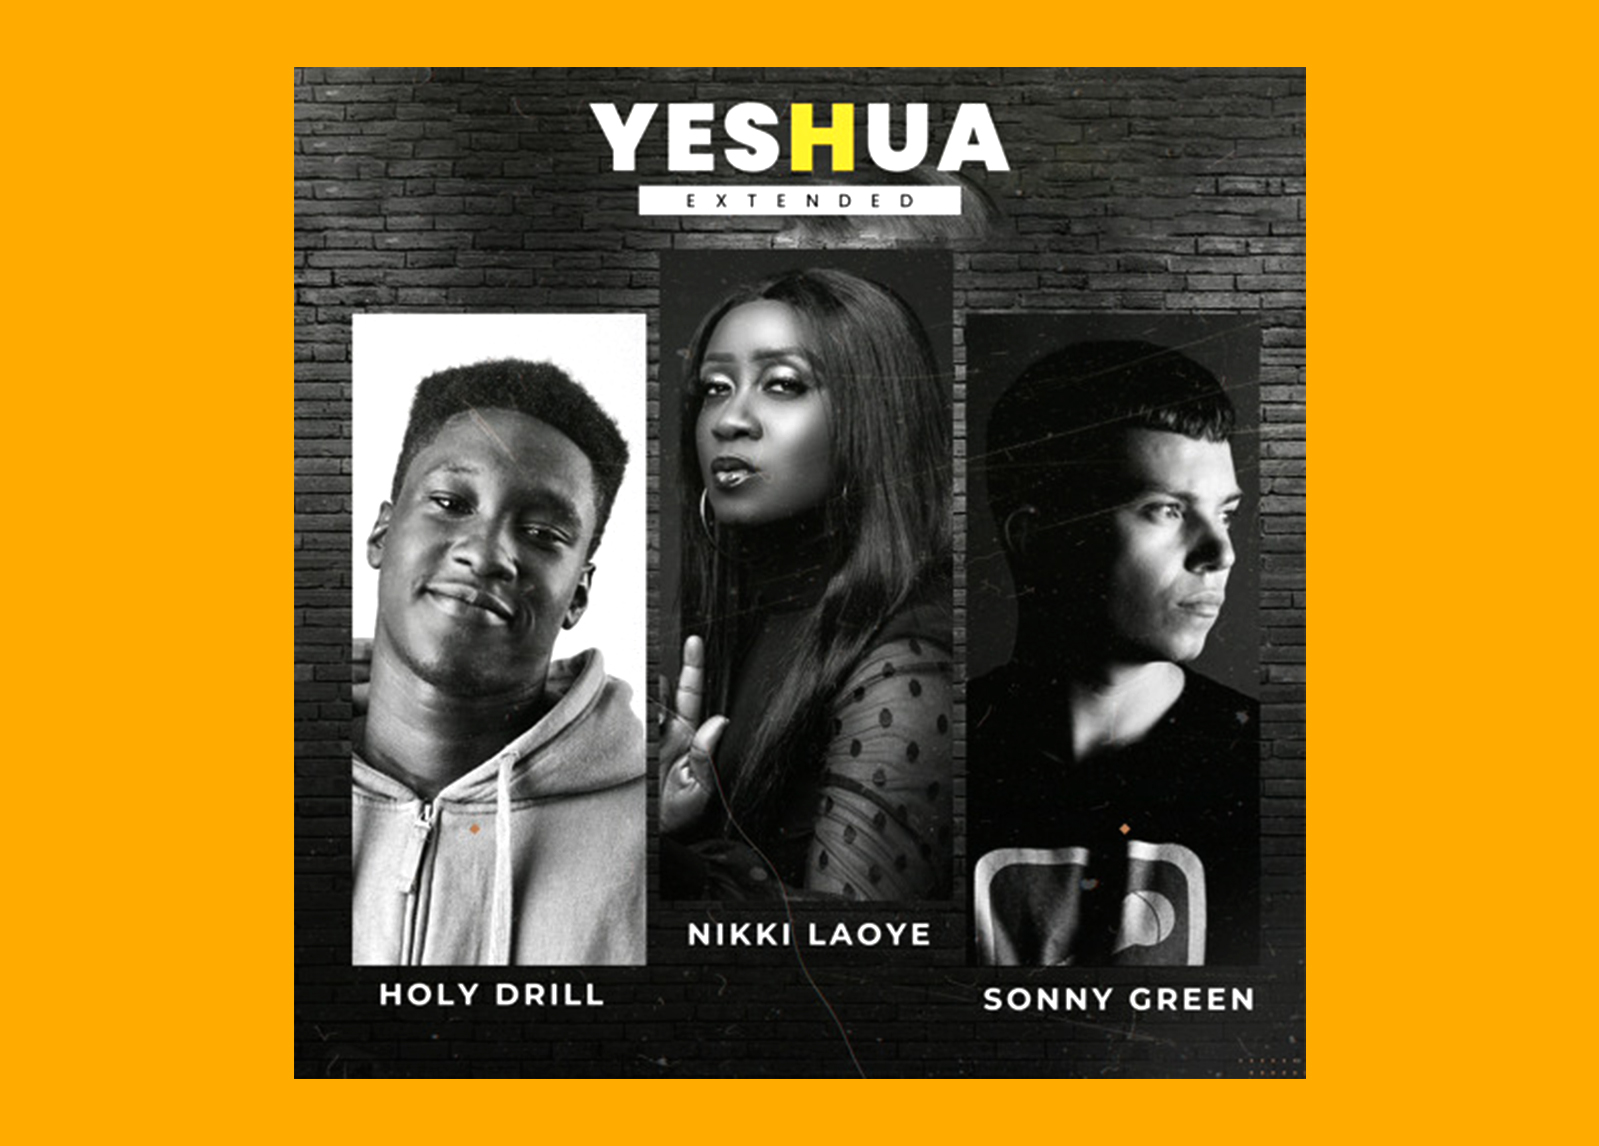 MUSIC: Holy drill Feat. x Nikki Laoye x Sonny Green- Yeshua (extended) [ Download mp3]